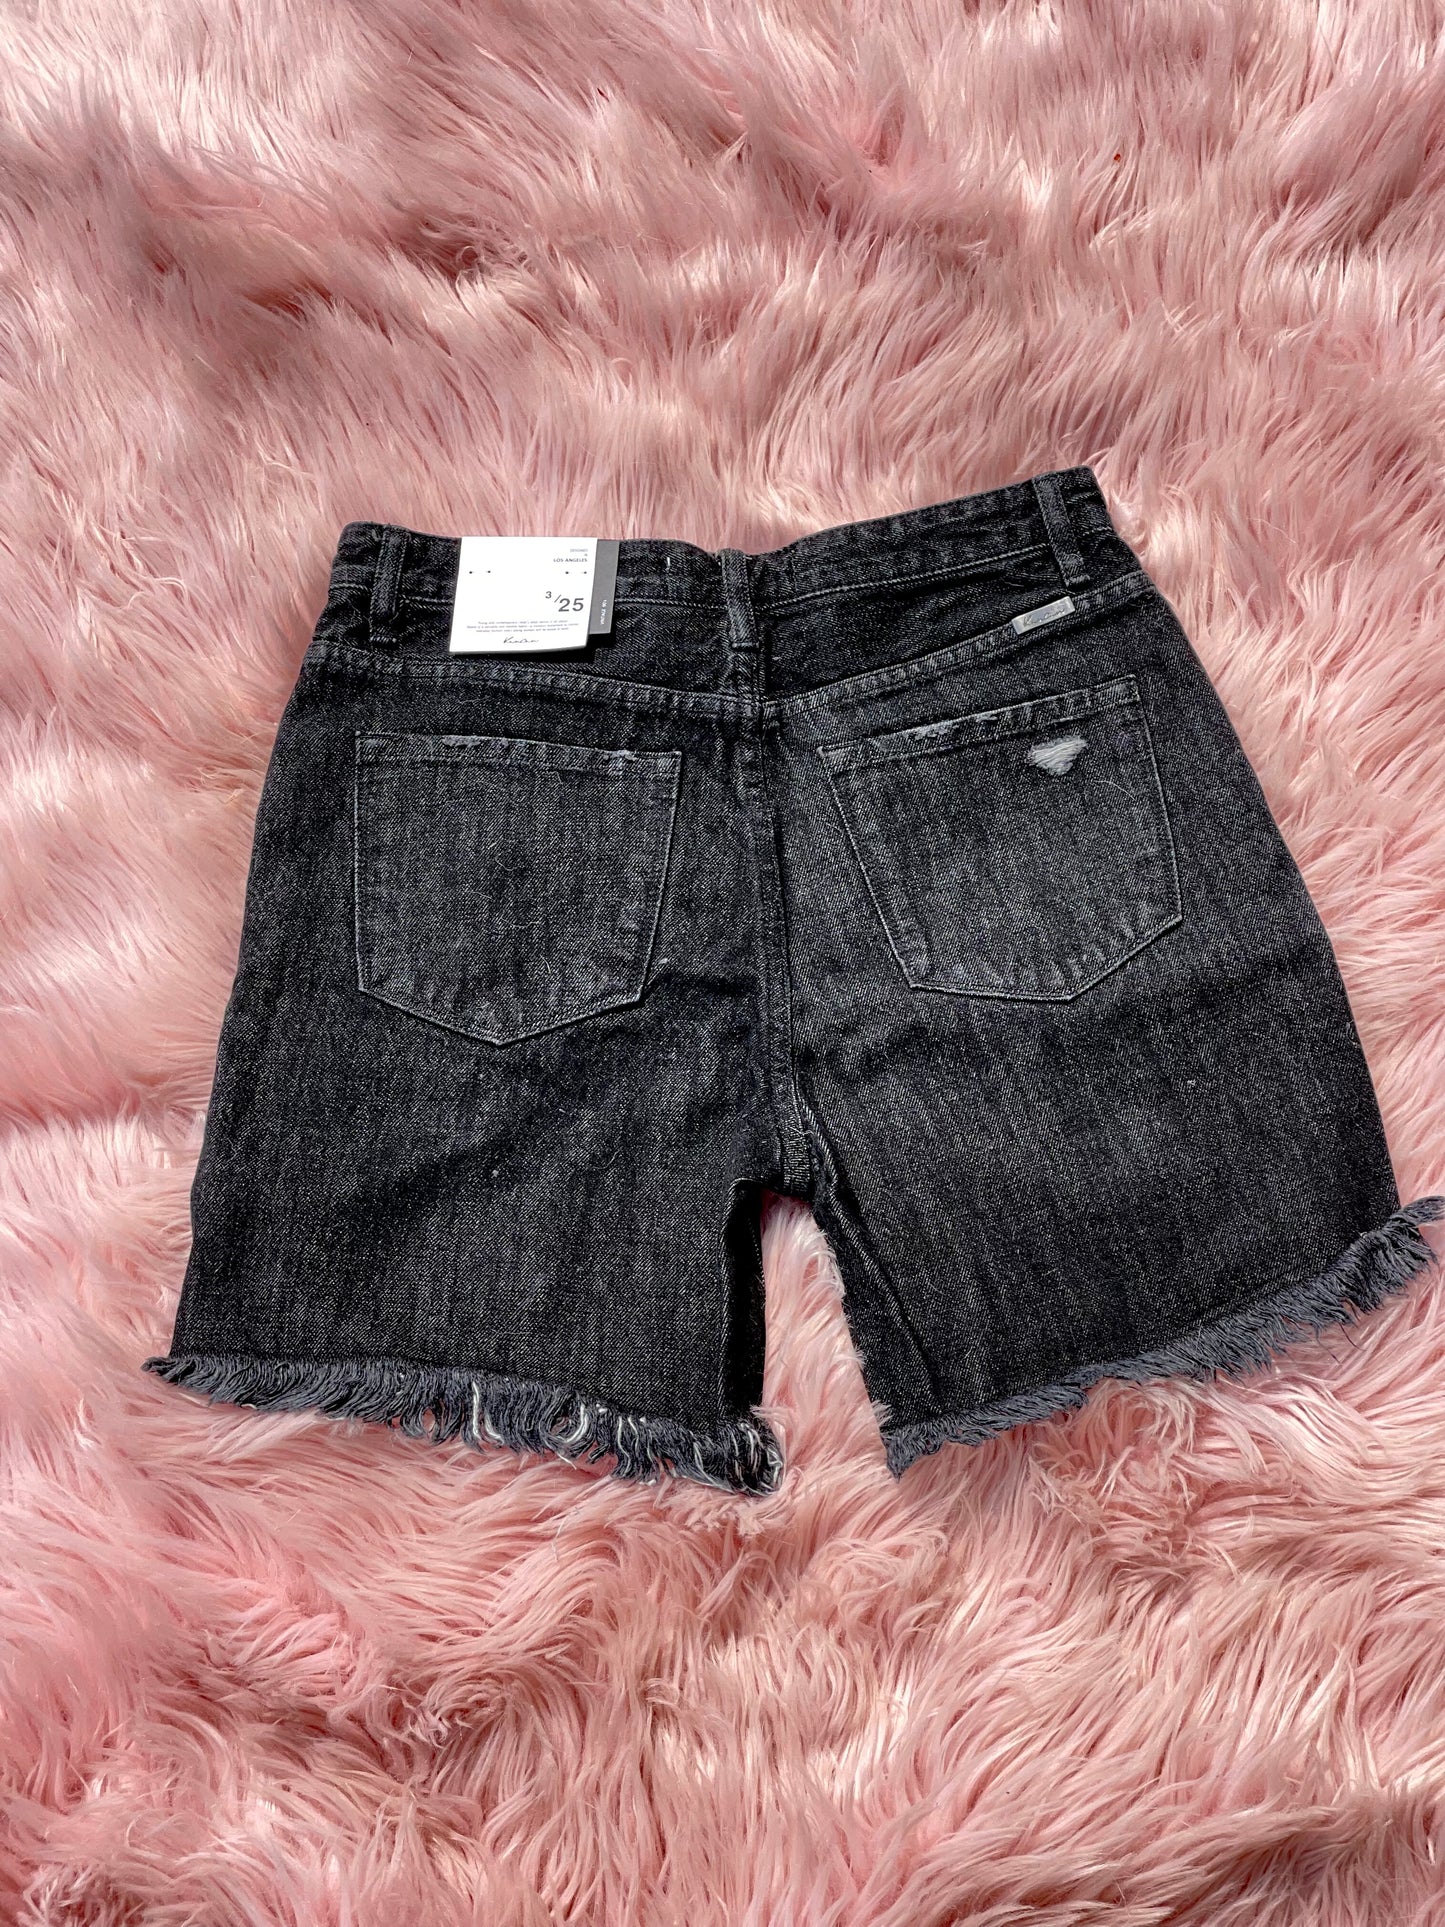 VINTAGE 90S Black High Rise Kan Can Shorts